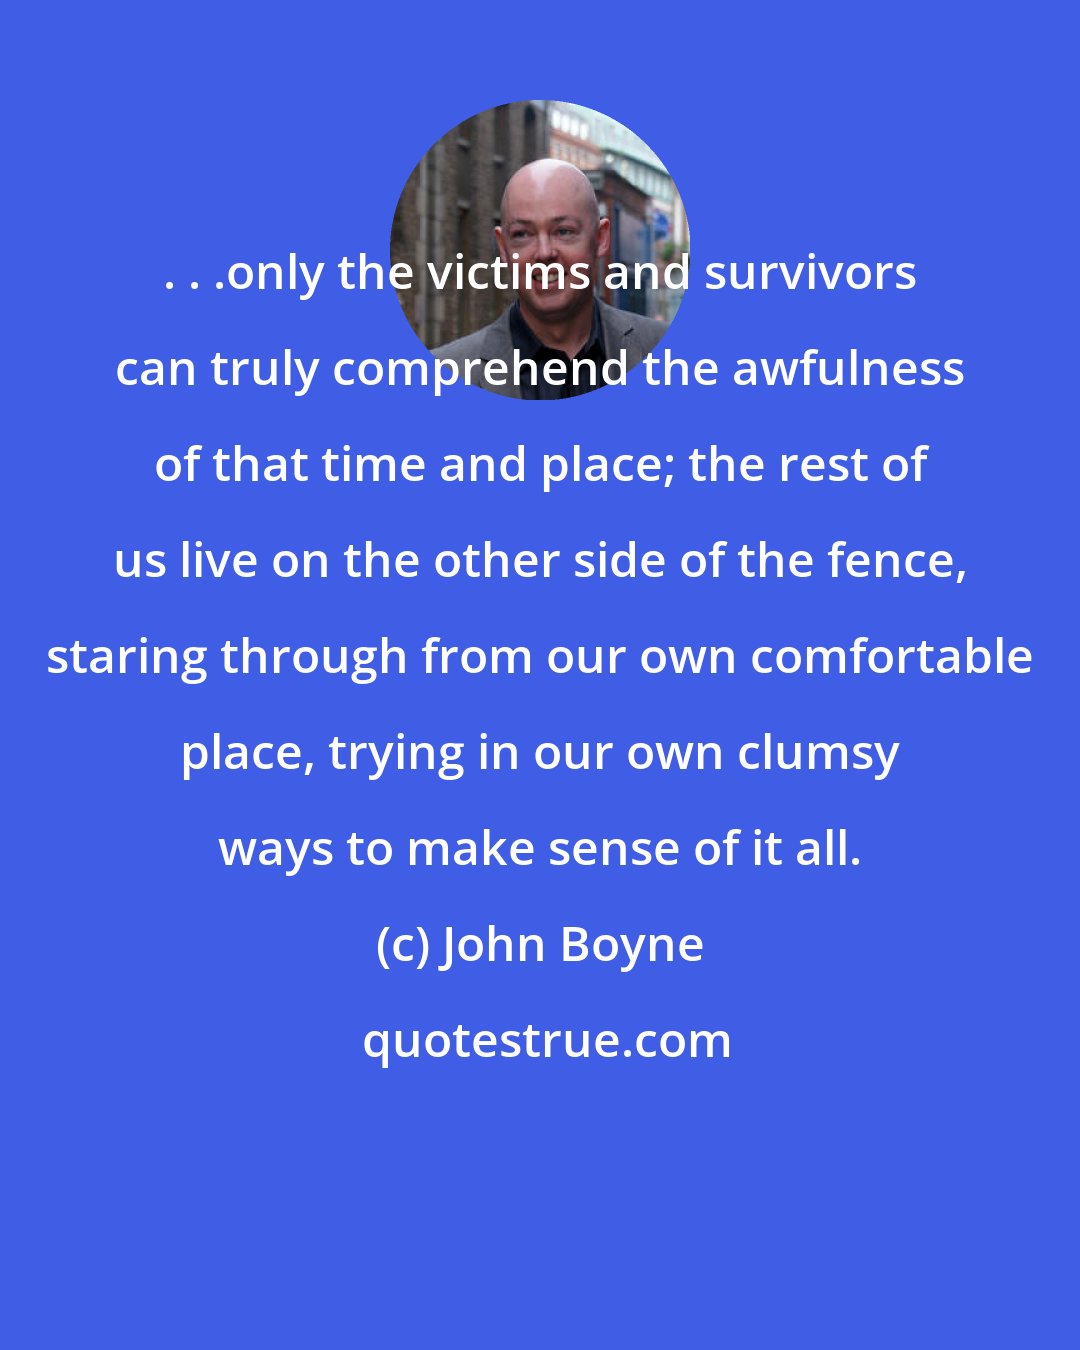 John Boyne: . . .only the victims and survivors can truly comprehend the awfulness of that time and place; the rest of us live on the other side of the fence, staring through from our own comfortable place, trying in our own clumsy ways to make sense of it all.